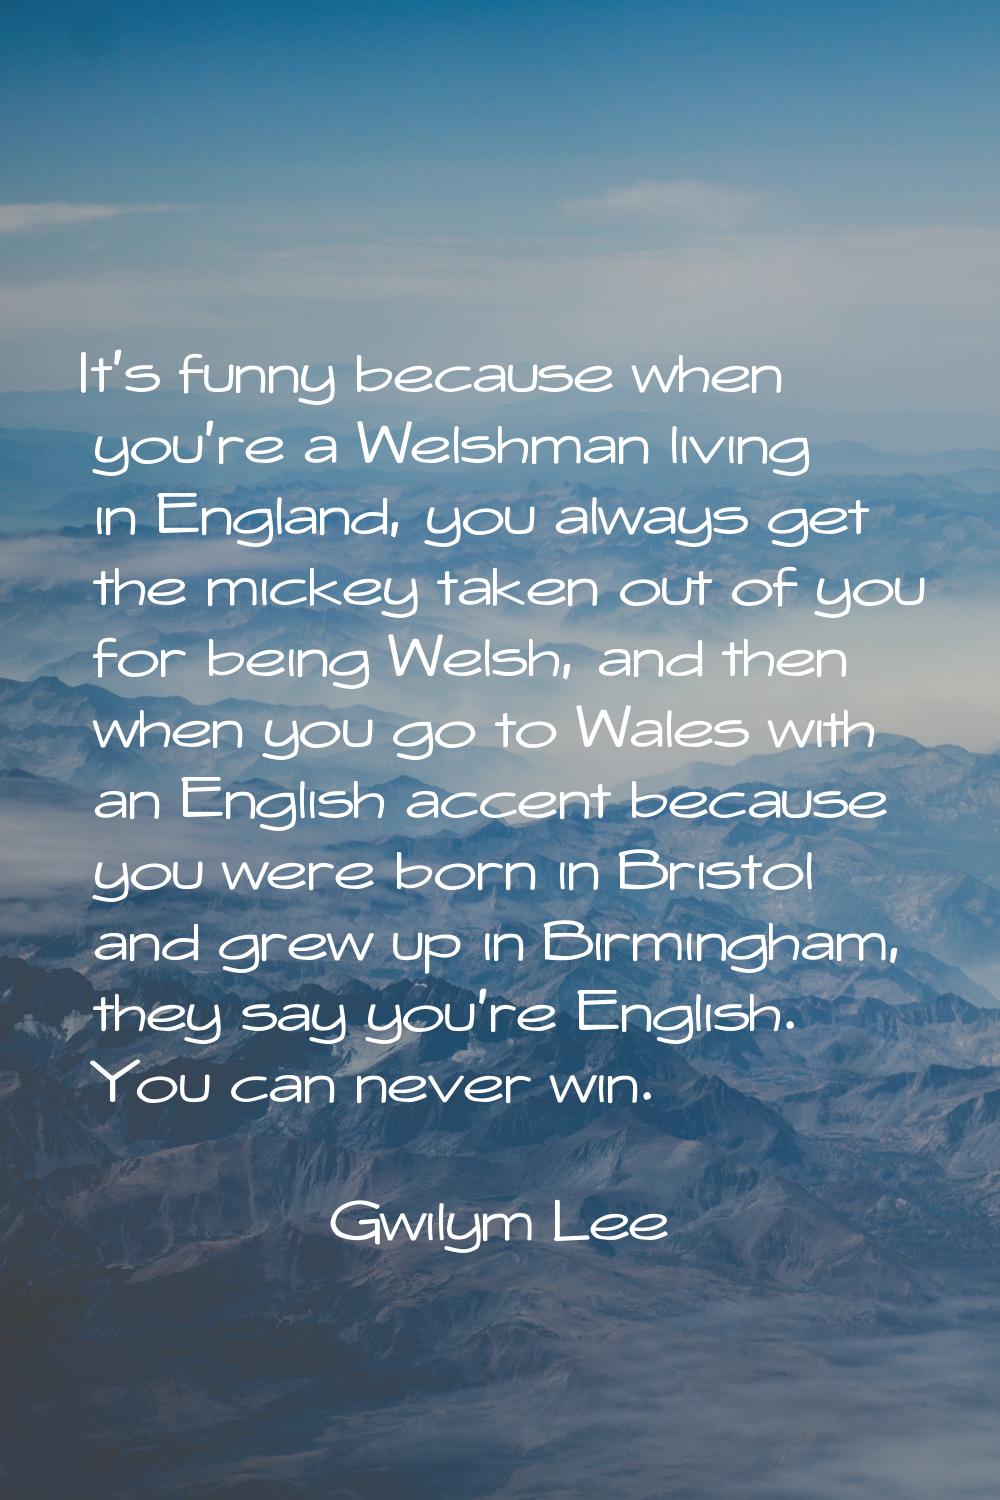 It's funny because when you're a Welshman living in England, you always get the mickey taken out of